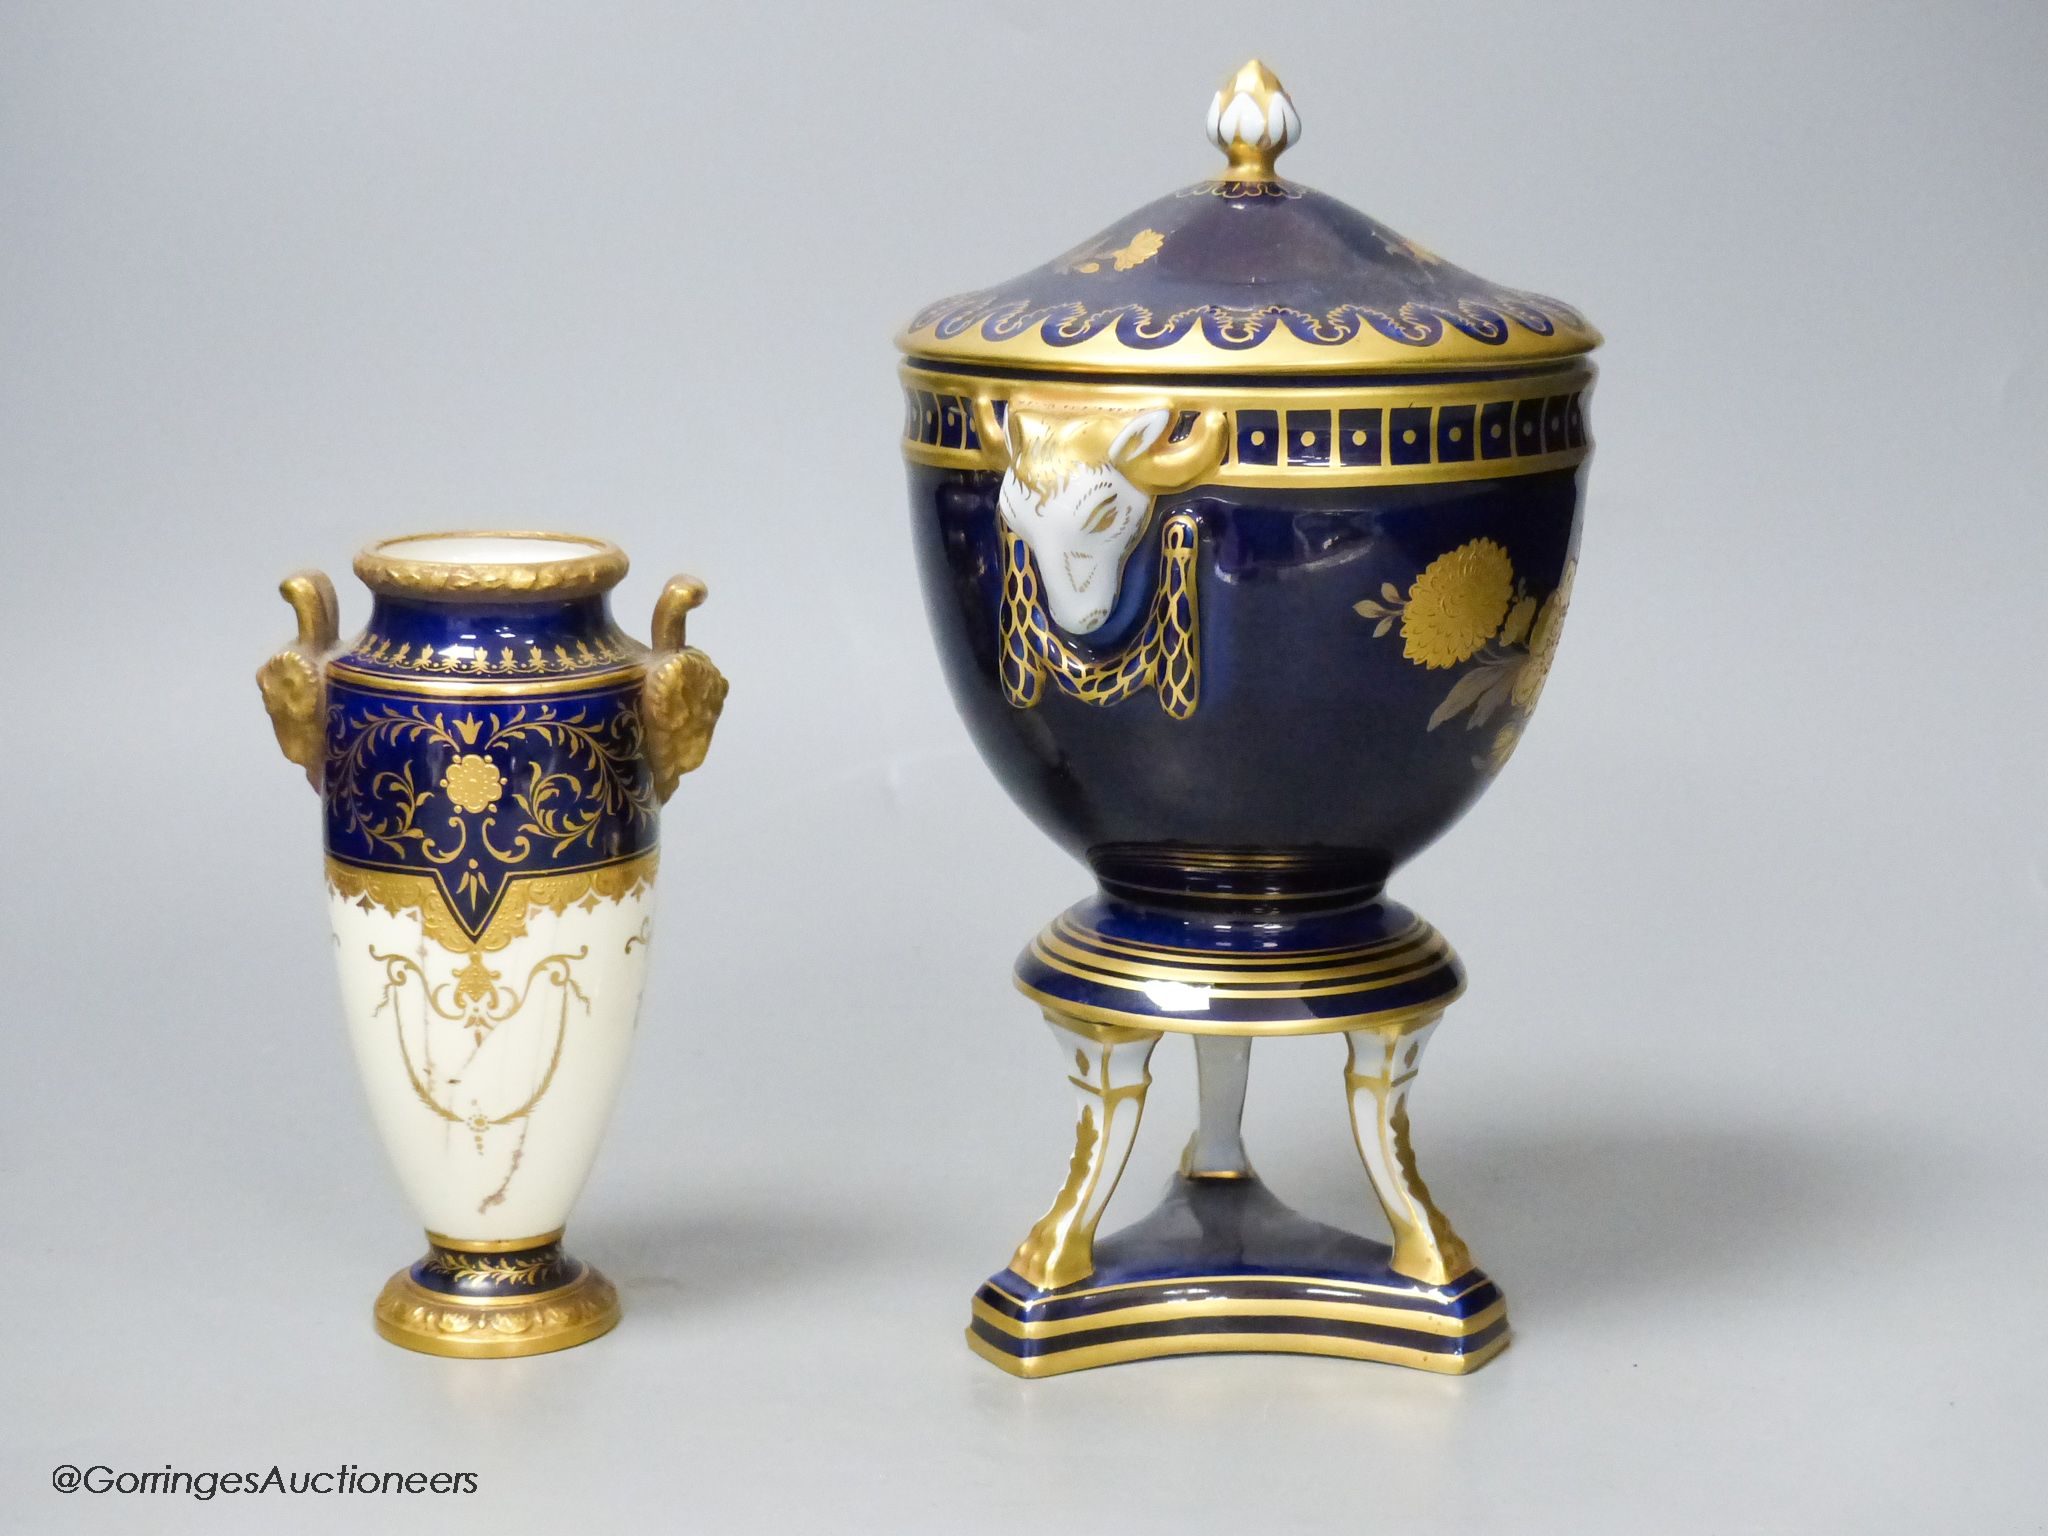 A Heutschenreuther porcelain vase and cover and a small Coalport vase (cracked), tallest 23cm - Image 3 of 4